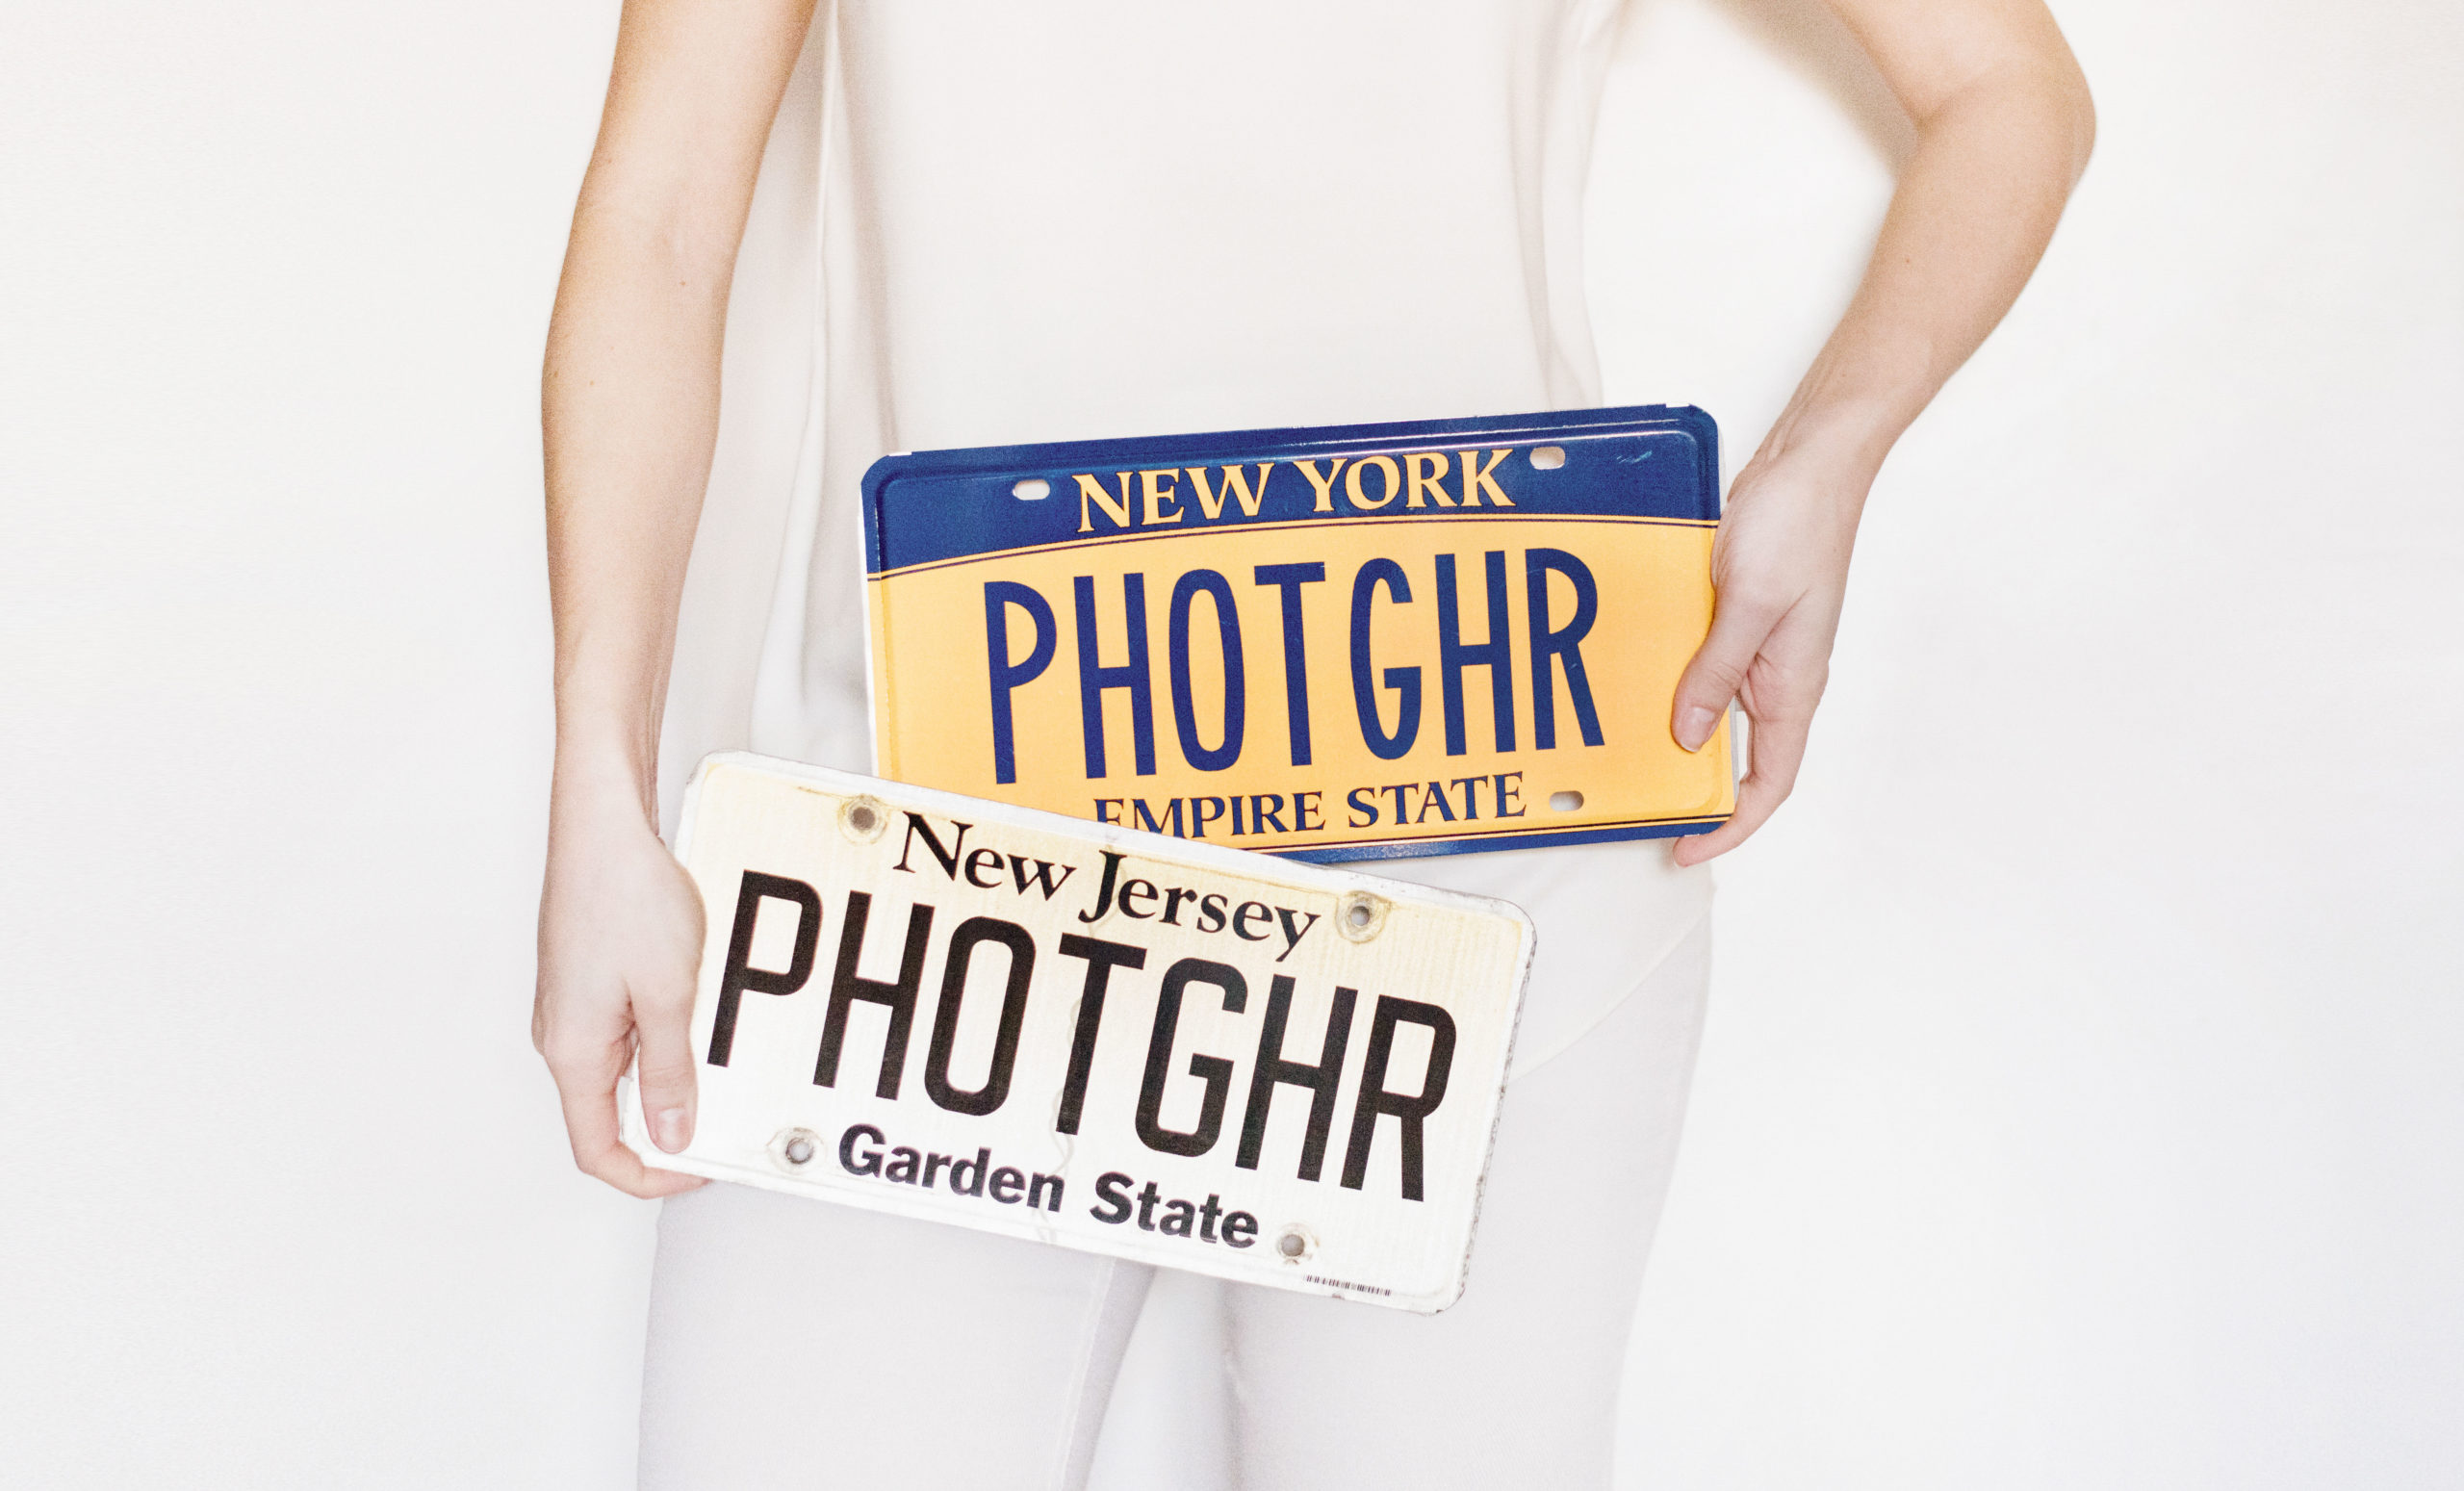 moving a nj new jersey llc photography business to ny new york